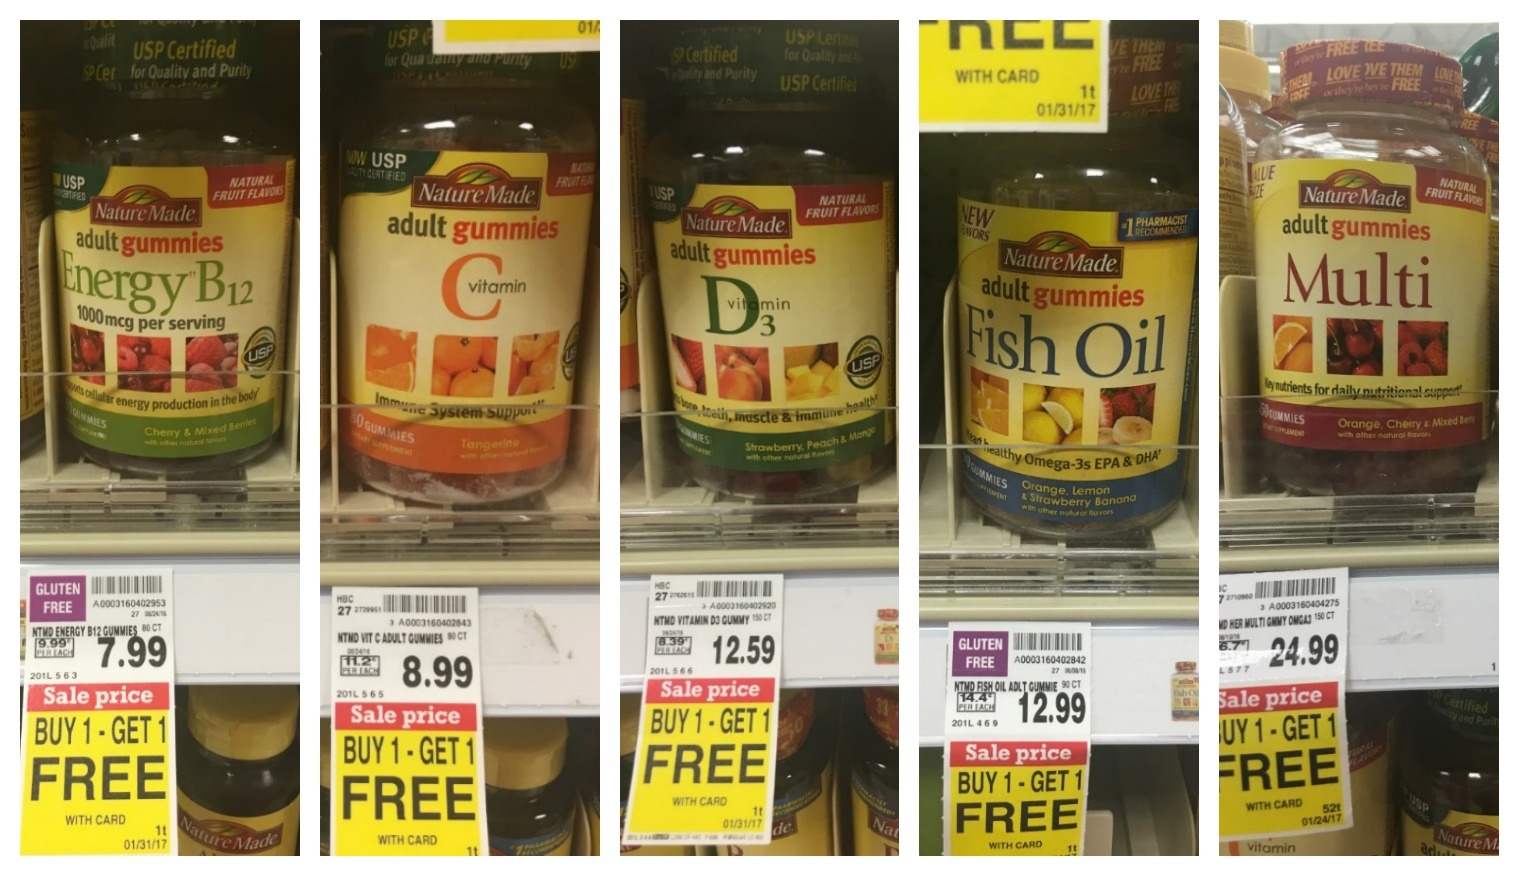 Great Deals On Nature Made Vitamins At Kroger!! | Kroger Krazy - Free Printable Nature Made Vitamin Coupons